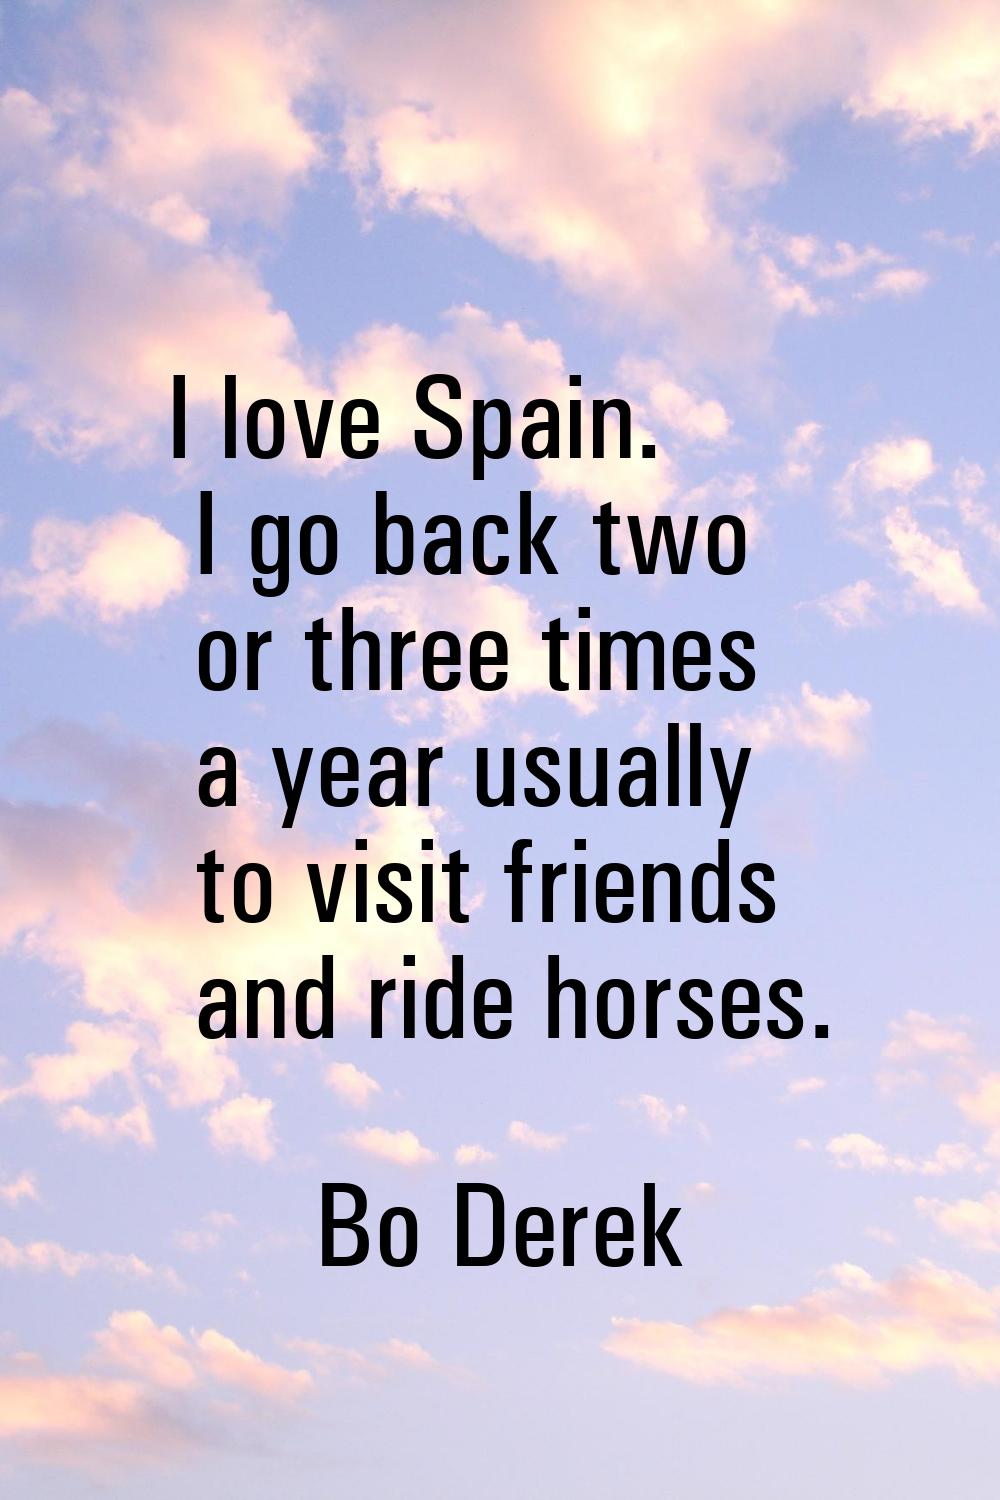 I love Spain. I go back two or three times a year usually to visit friends and ride horses.